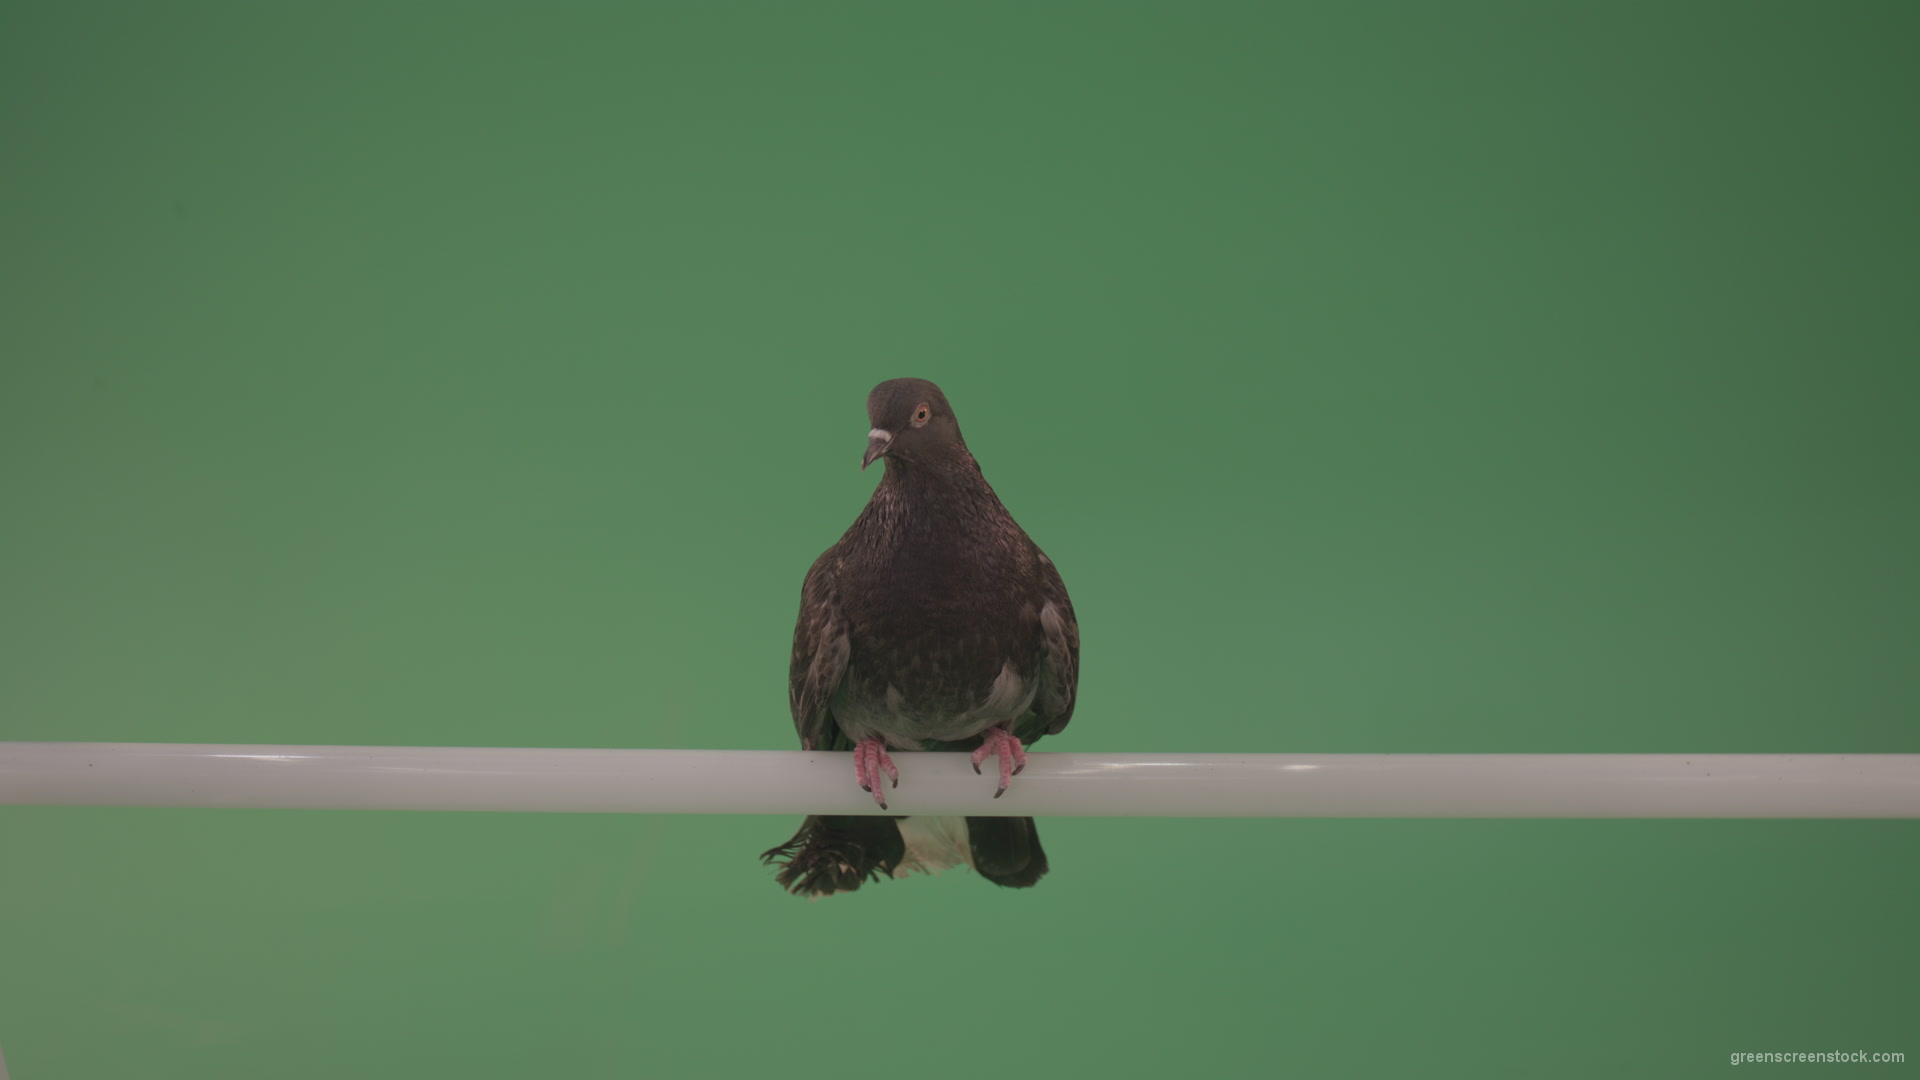 Wild-bird-doves-sit-on-the-branch-and-peer-around-isolated-on-green-screen_001 Green Screen Stock